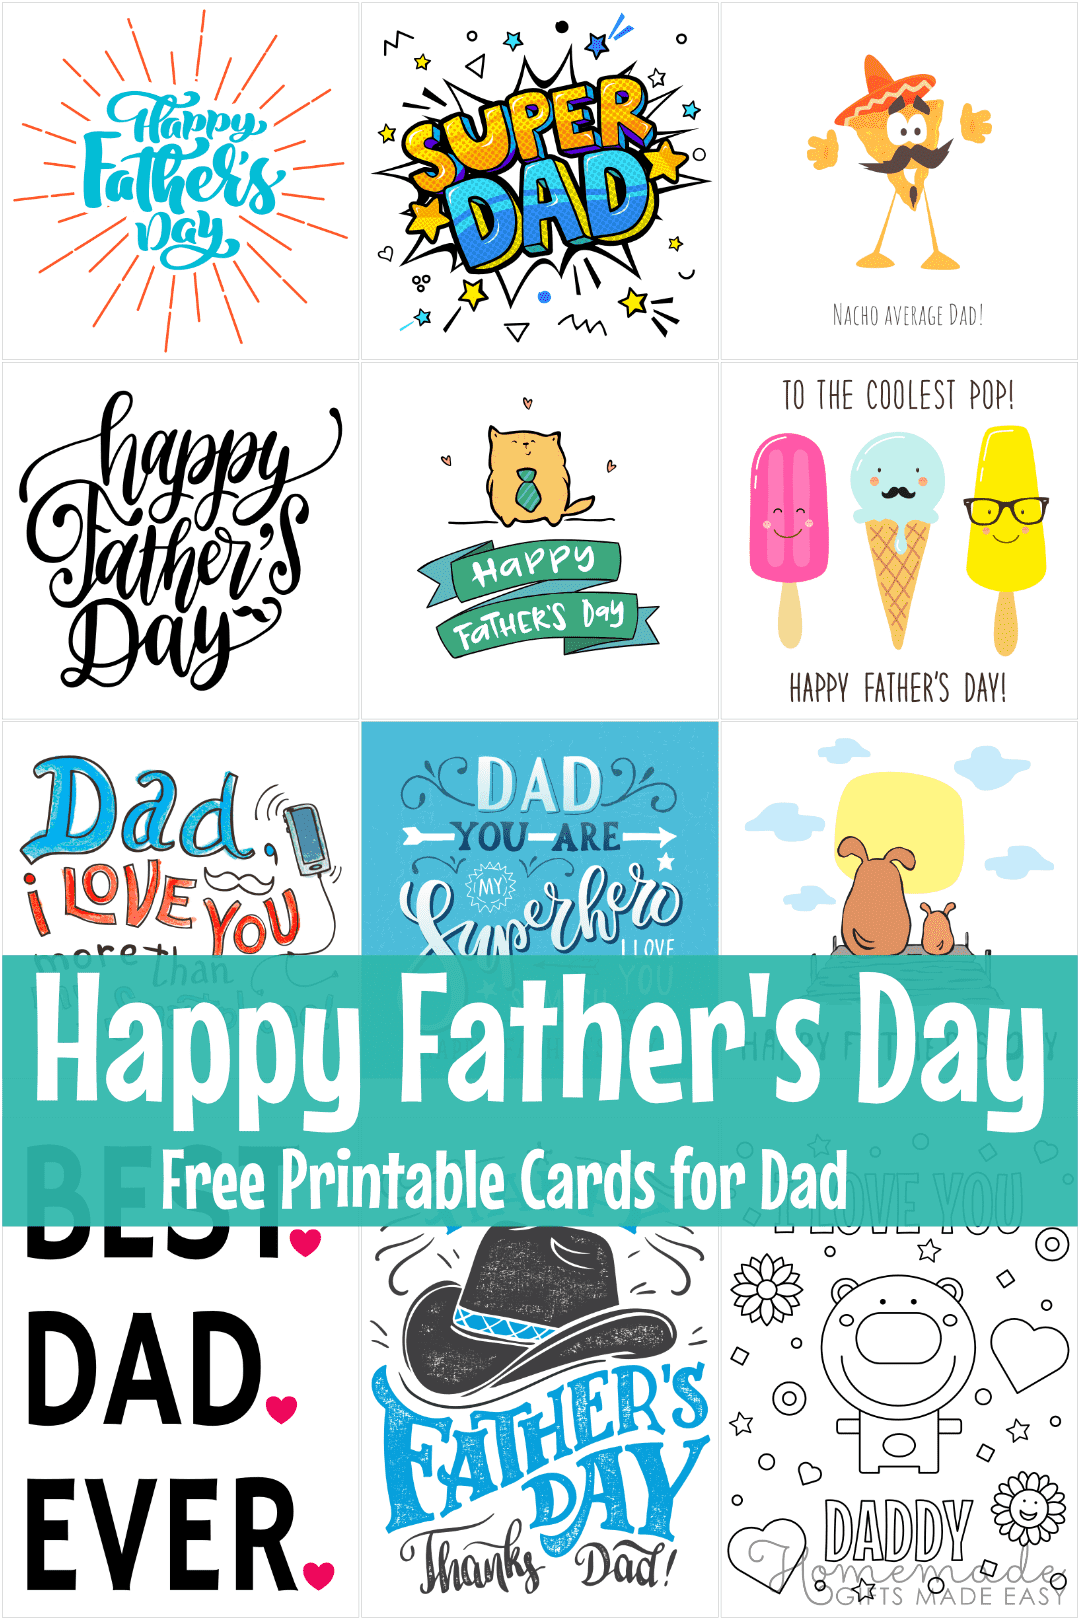 Download 130 Best Happy Father S Day Wishes Quotes 2021